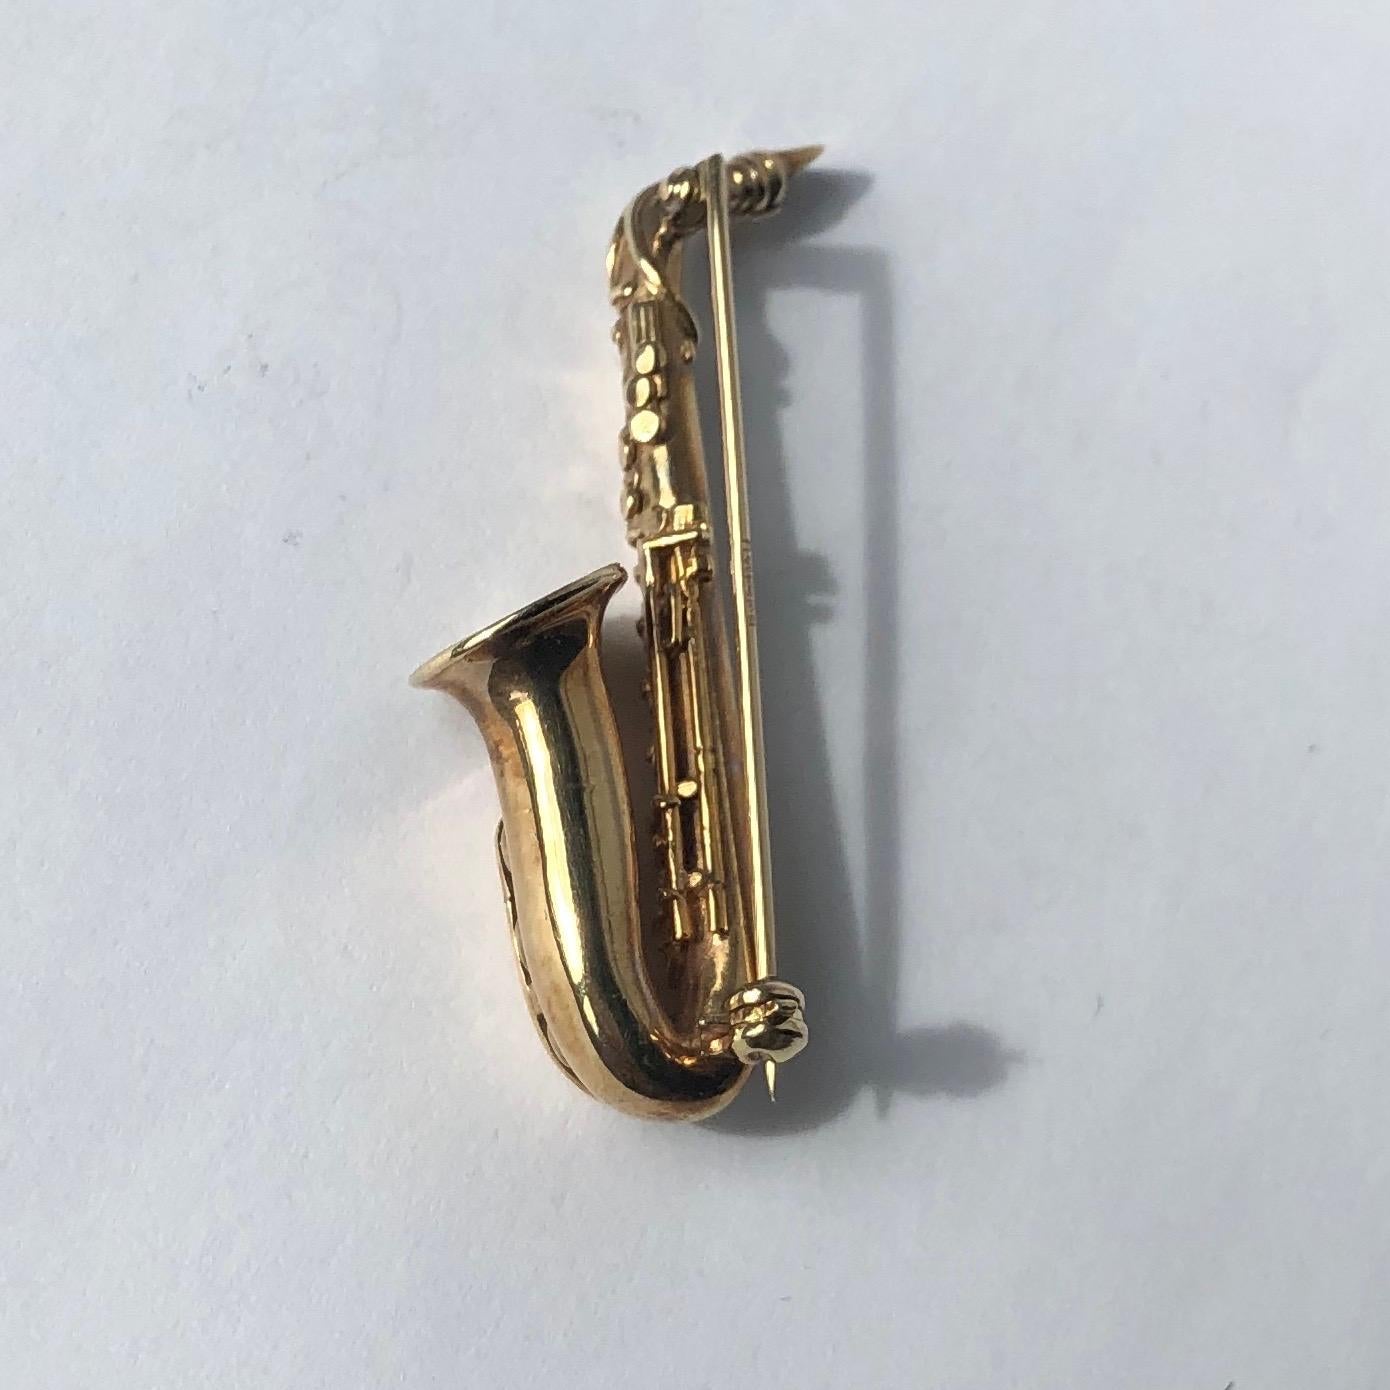 This exquisite sax brooch has so much detail. It is beautiful and the perfect item for any music lover or musician. 

Brooch Dimensions: 45x23mm

Weight: 10.61g